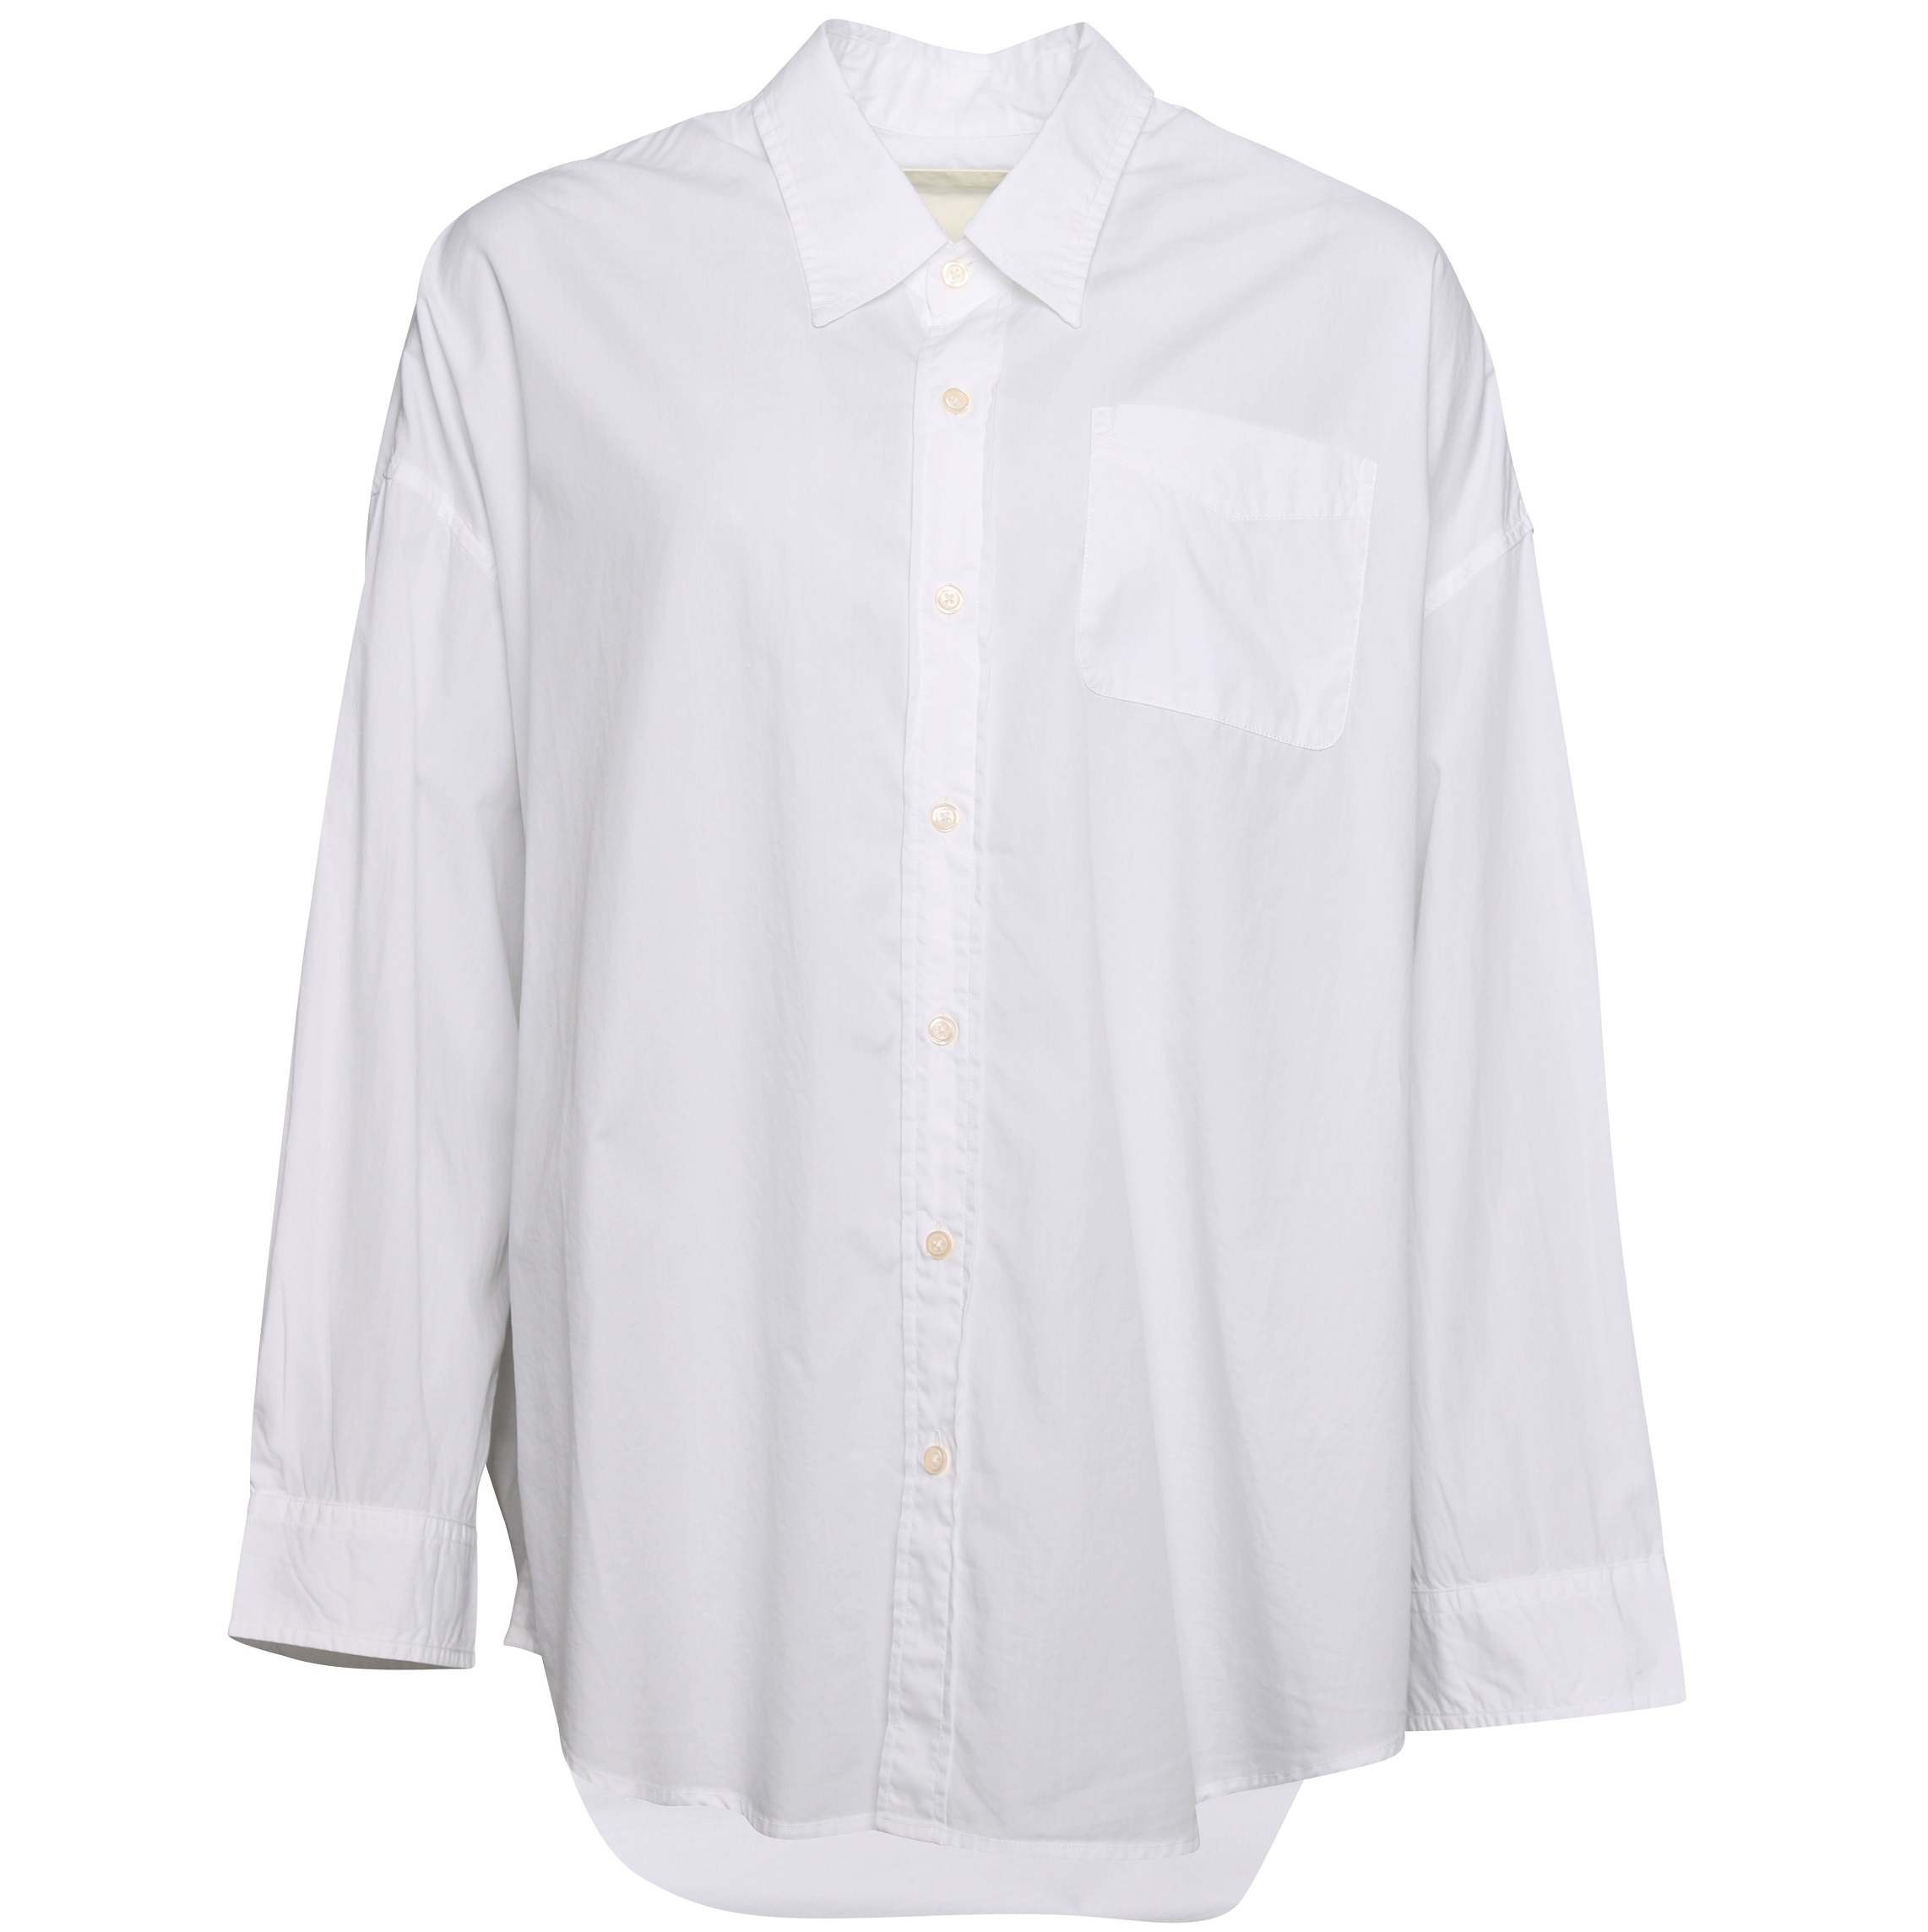 R13 Drop Neck Oxford Shirt in White S